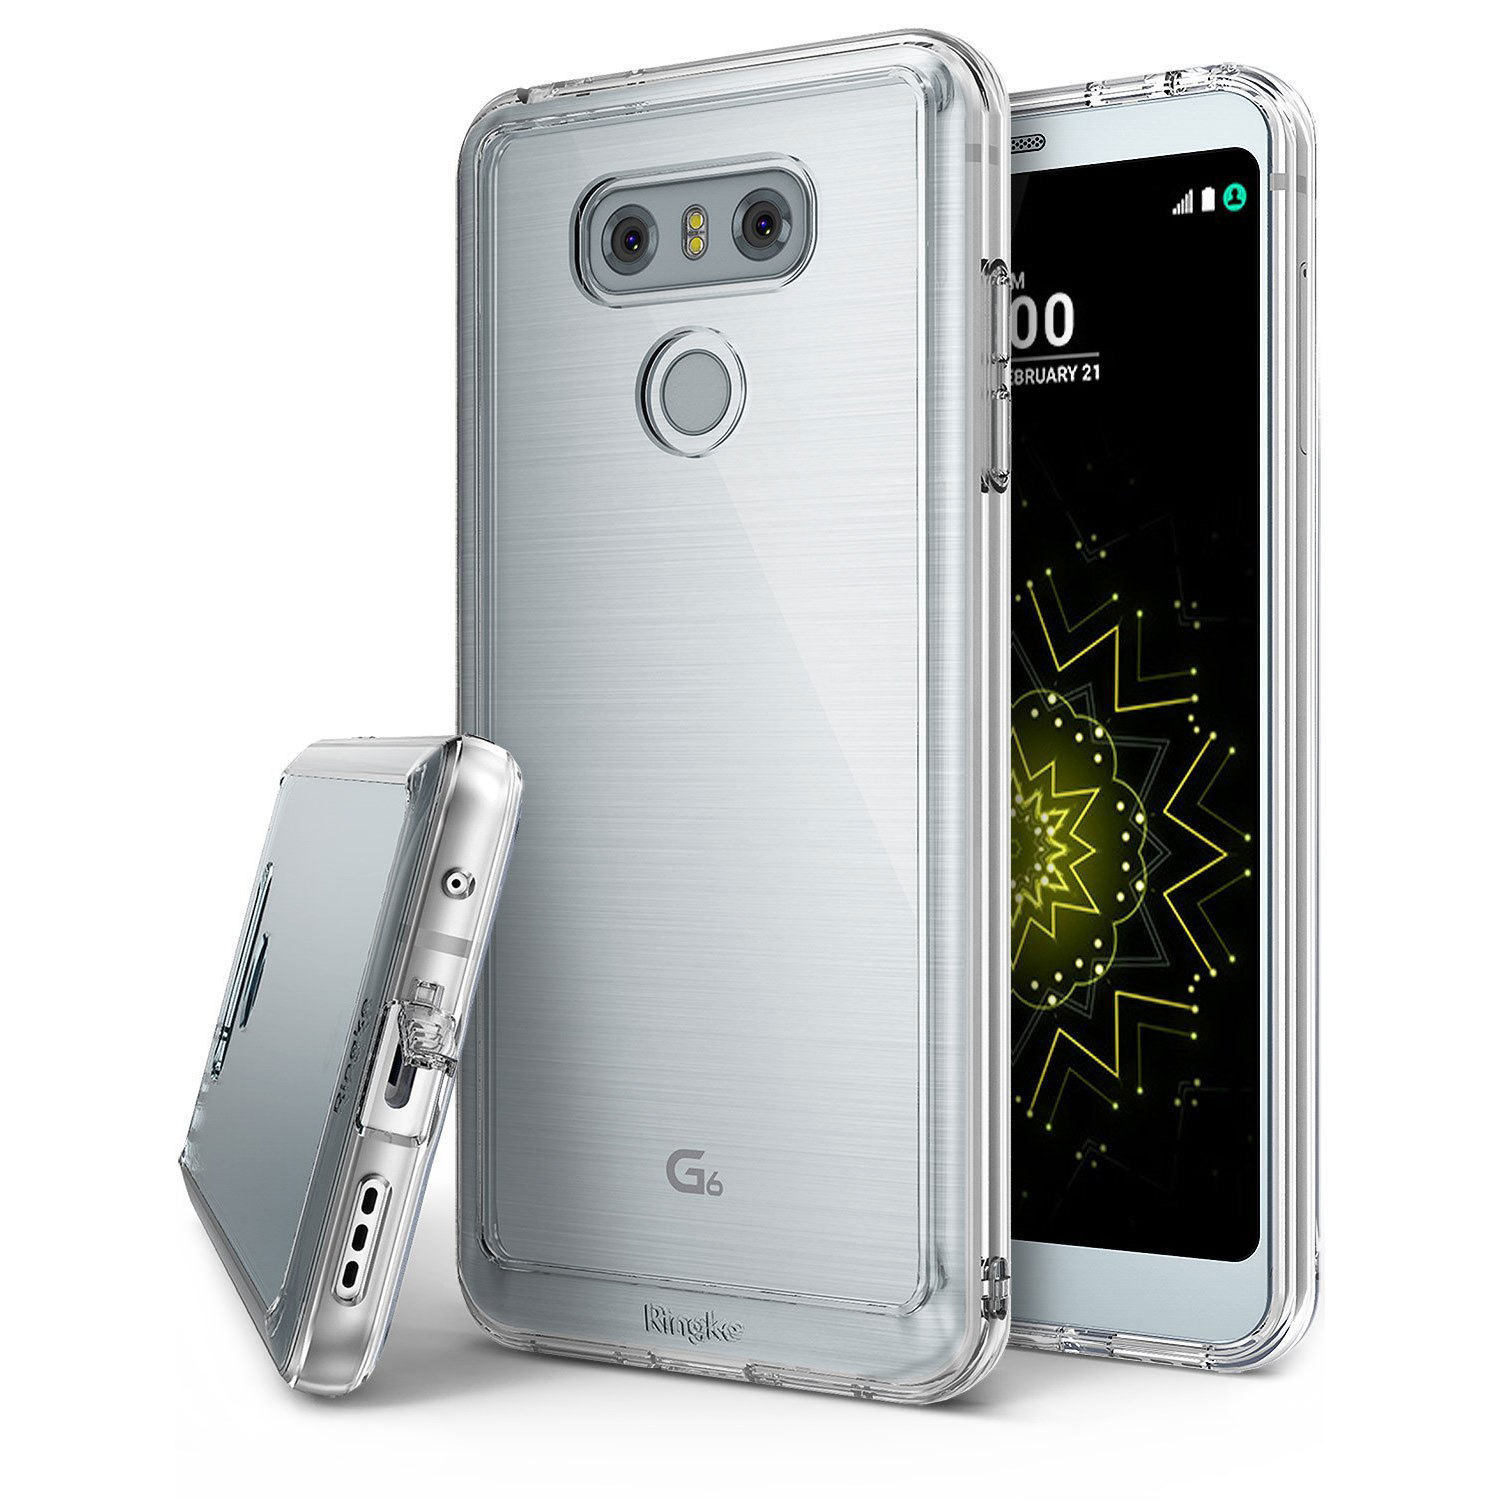 Rearth Ringke Fusion LG G6 Case - Clear